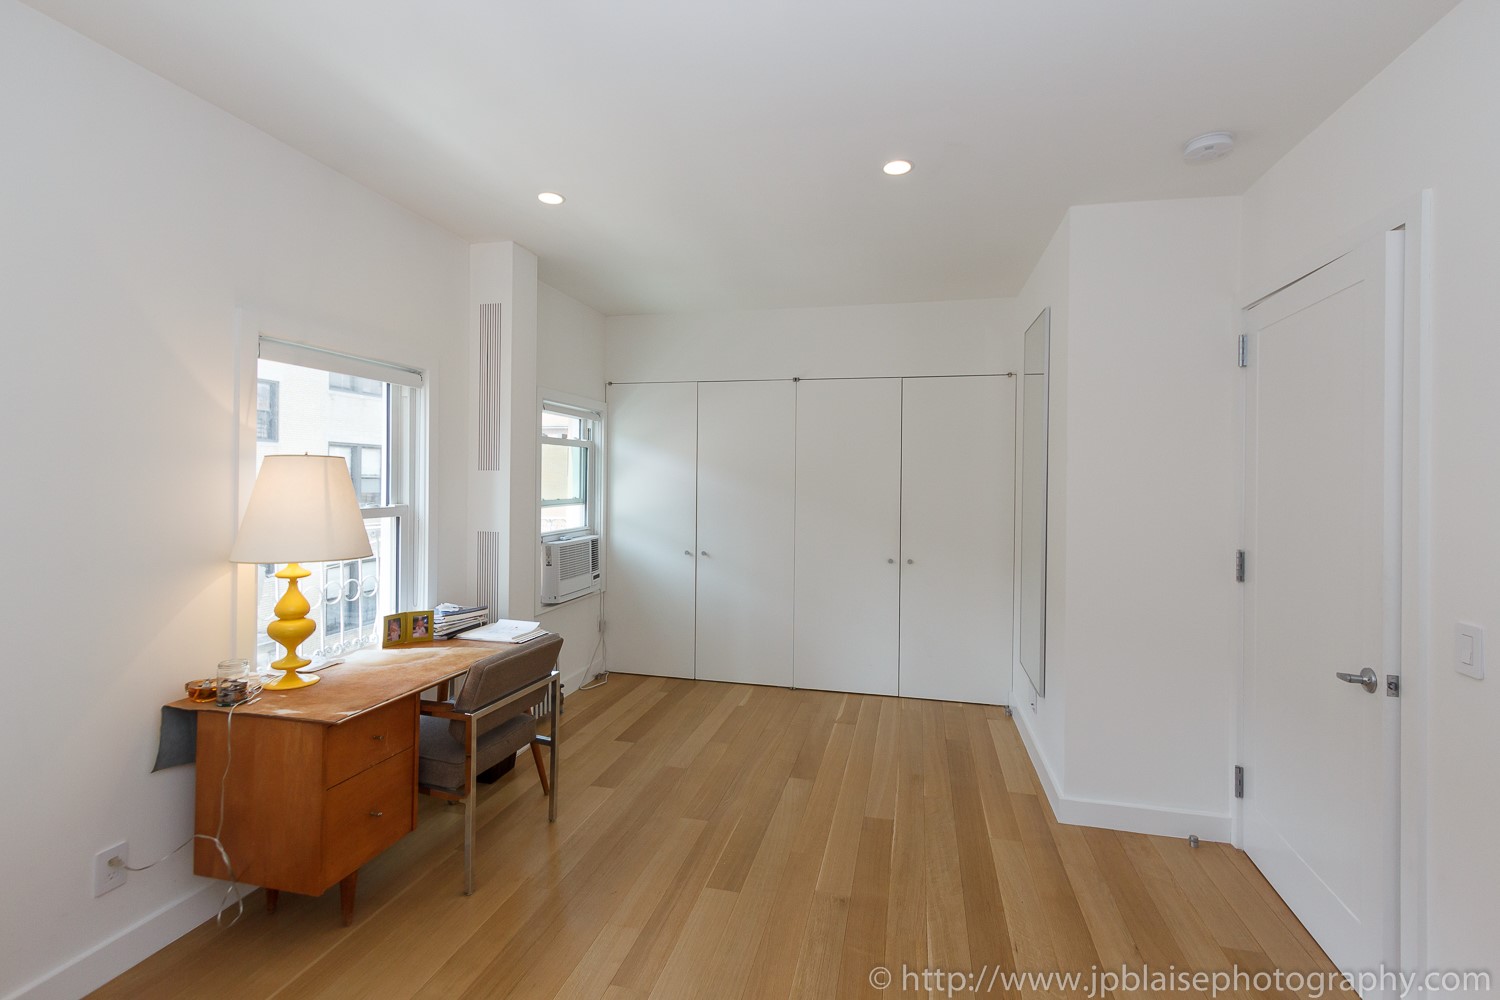 NY Real estate photography two bedroom apartment in west village manhattan